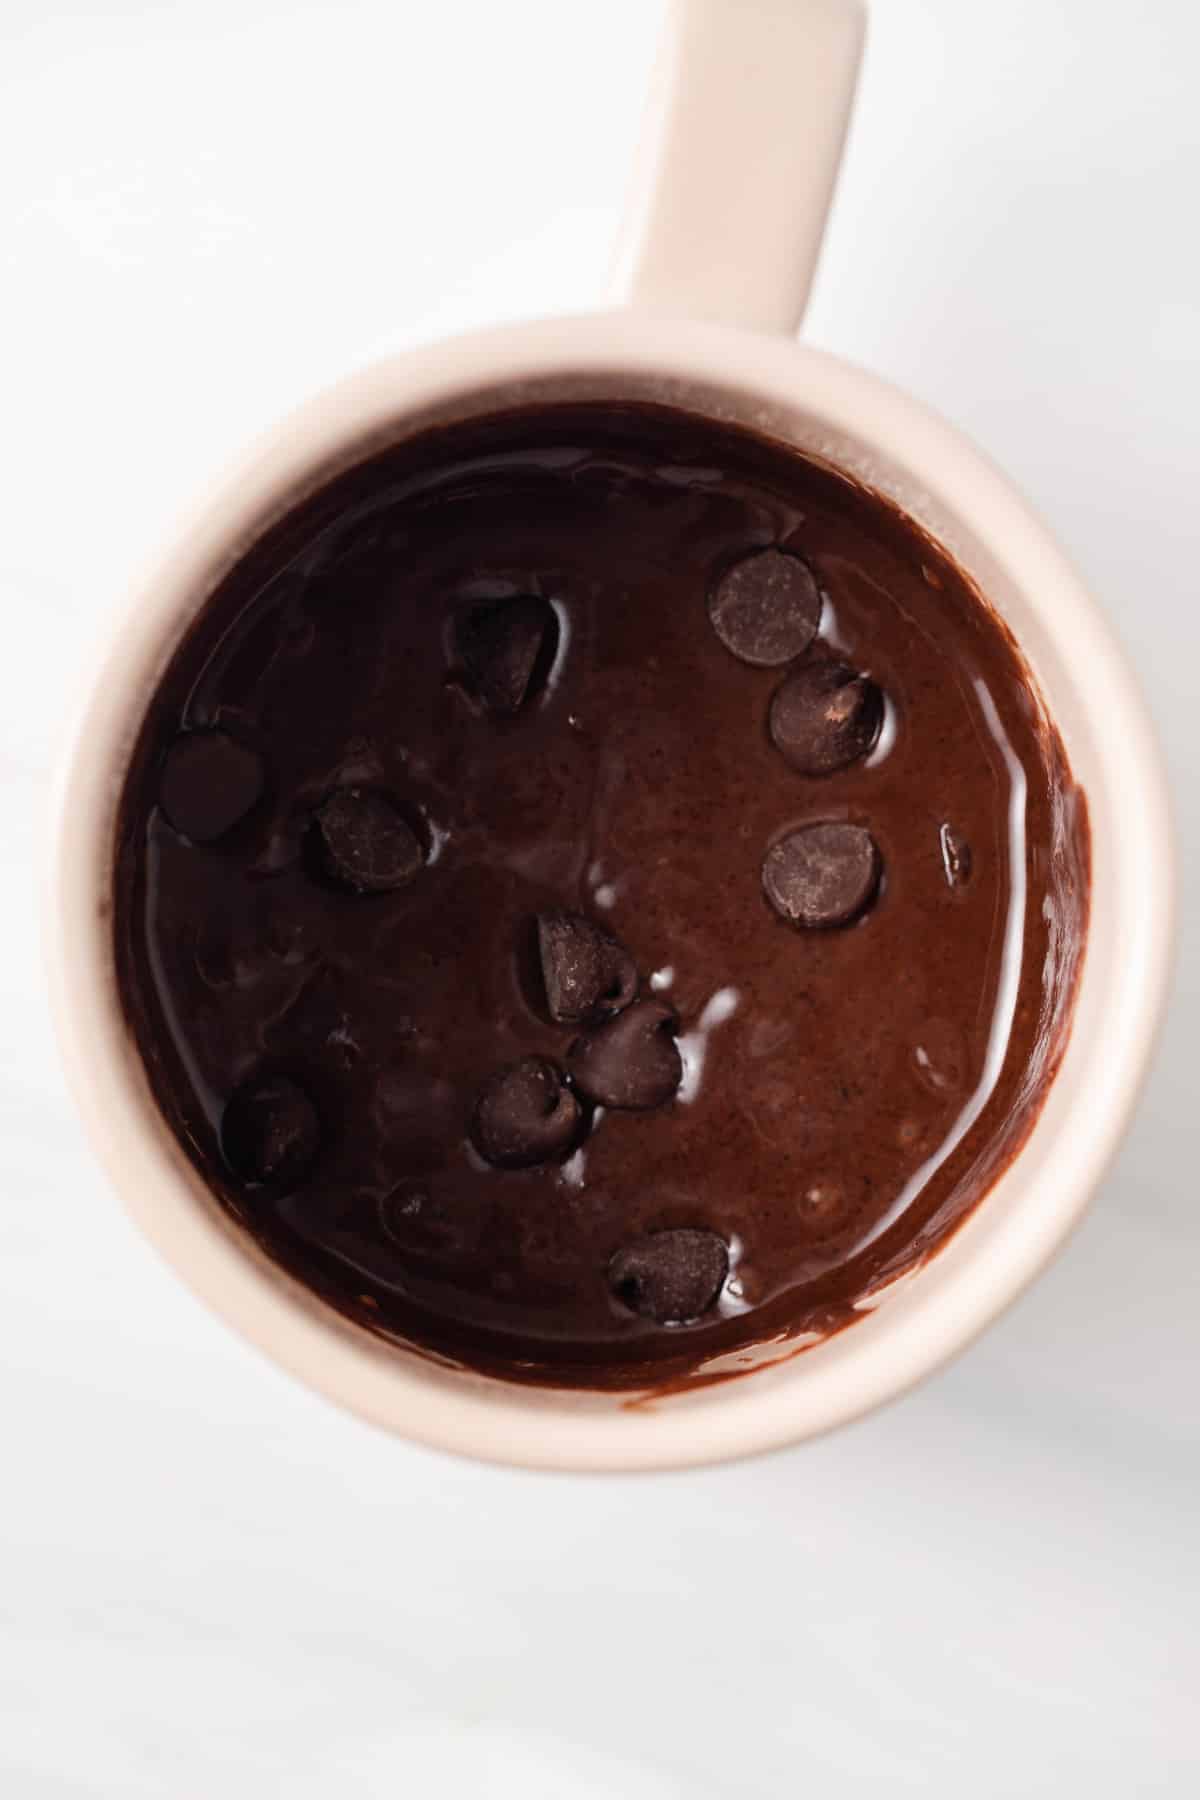 Brownie batter in a mug with chocolate chips.